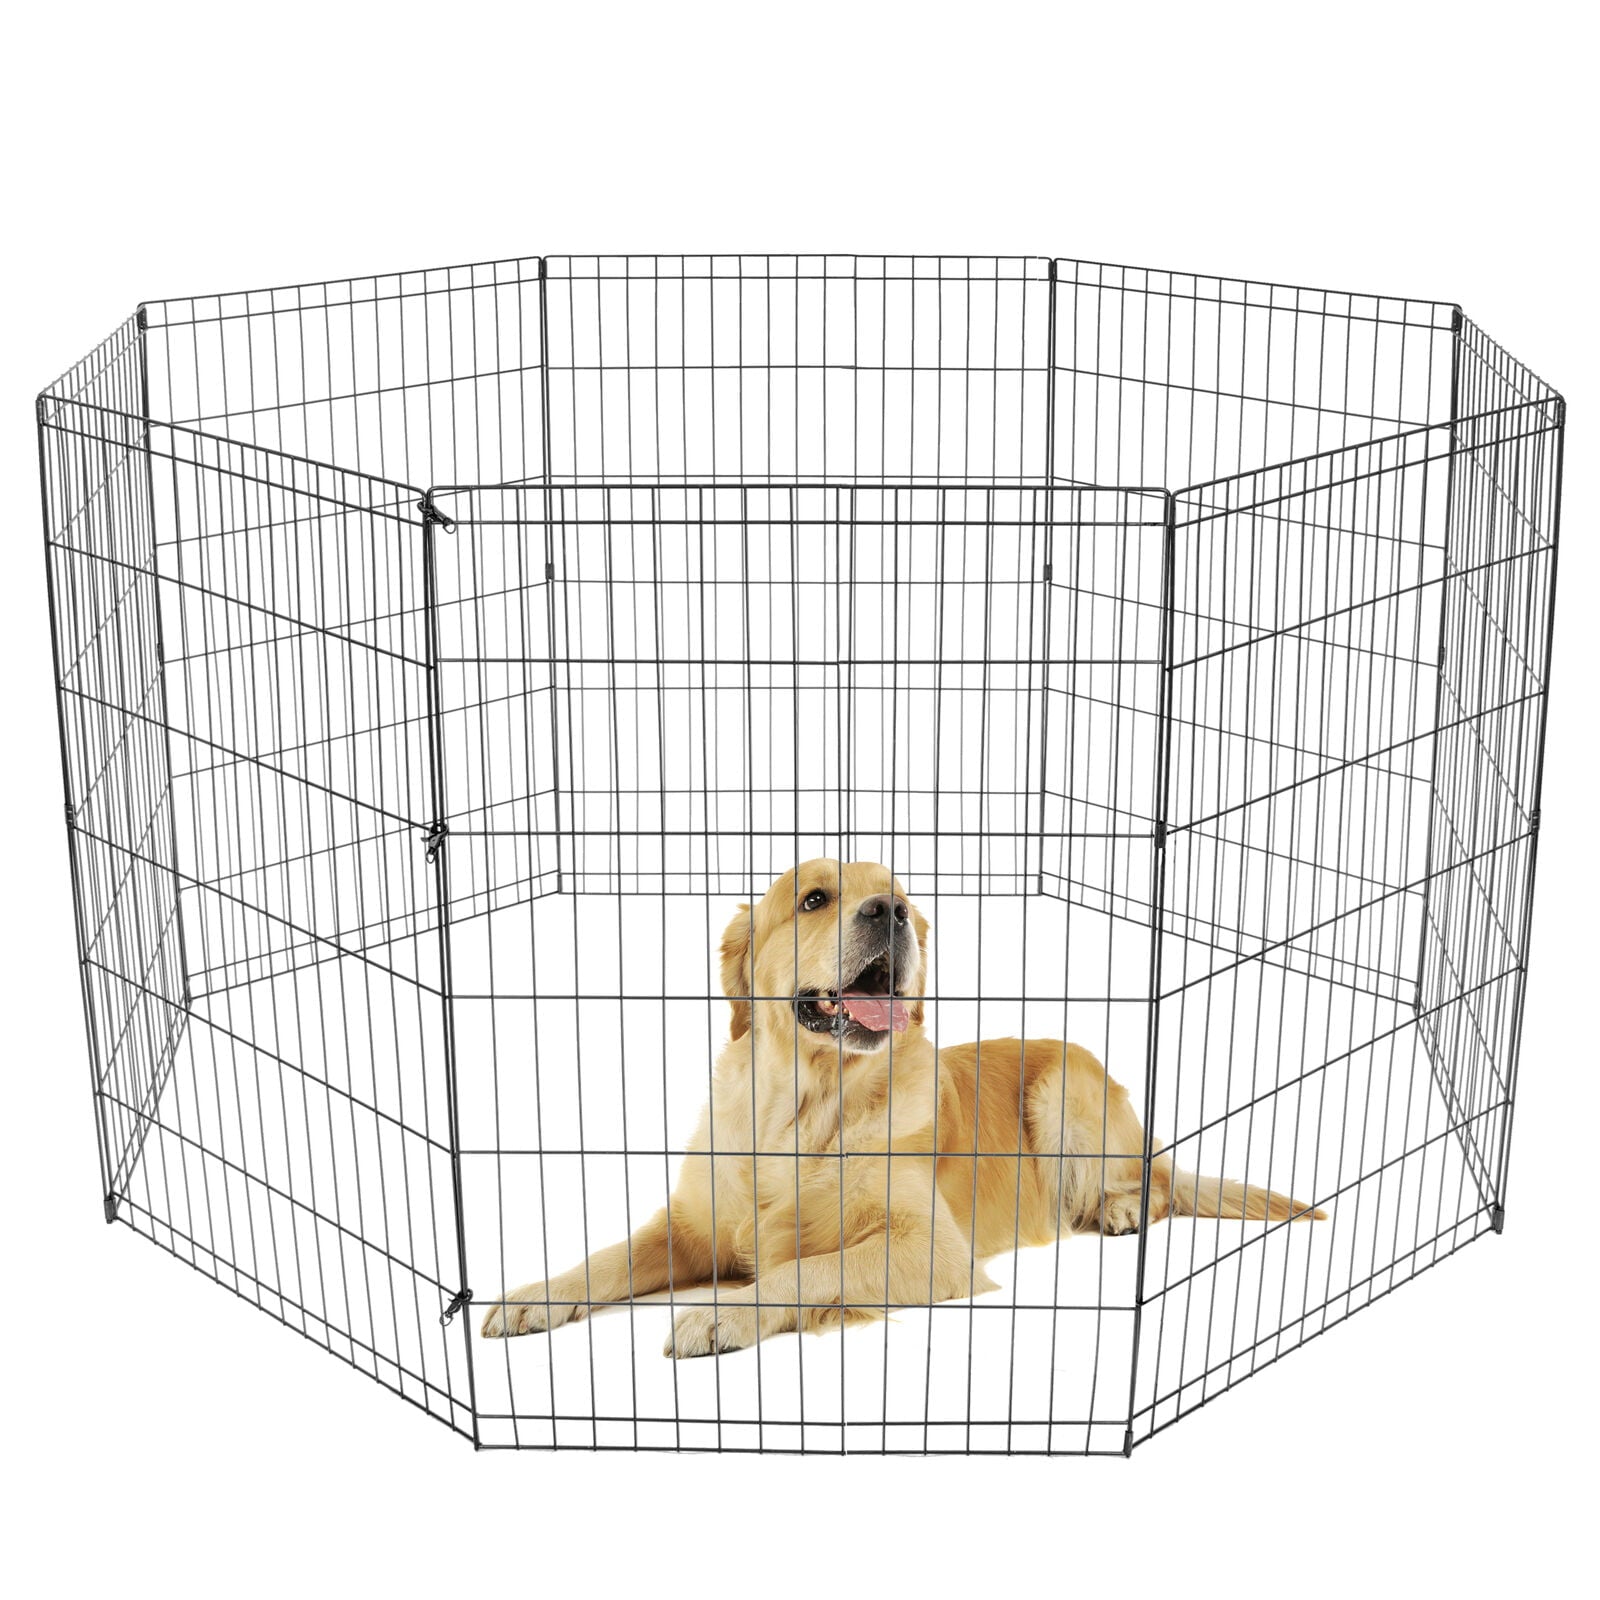 ZENSTYLE 36 Inch 8 Panels Indoor Outdoor Dog Playpen Large Crate Fence Pet Play Pen Exercise Cage